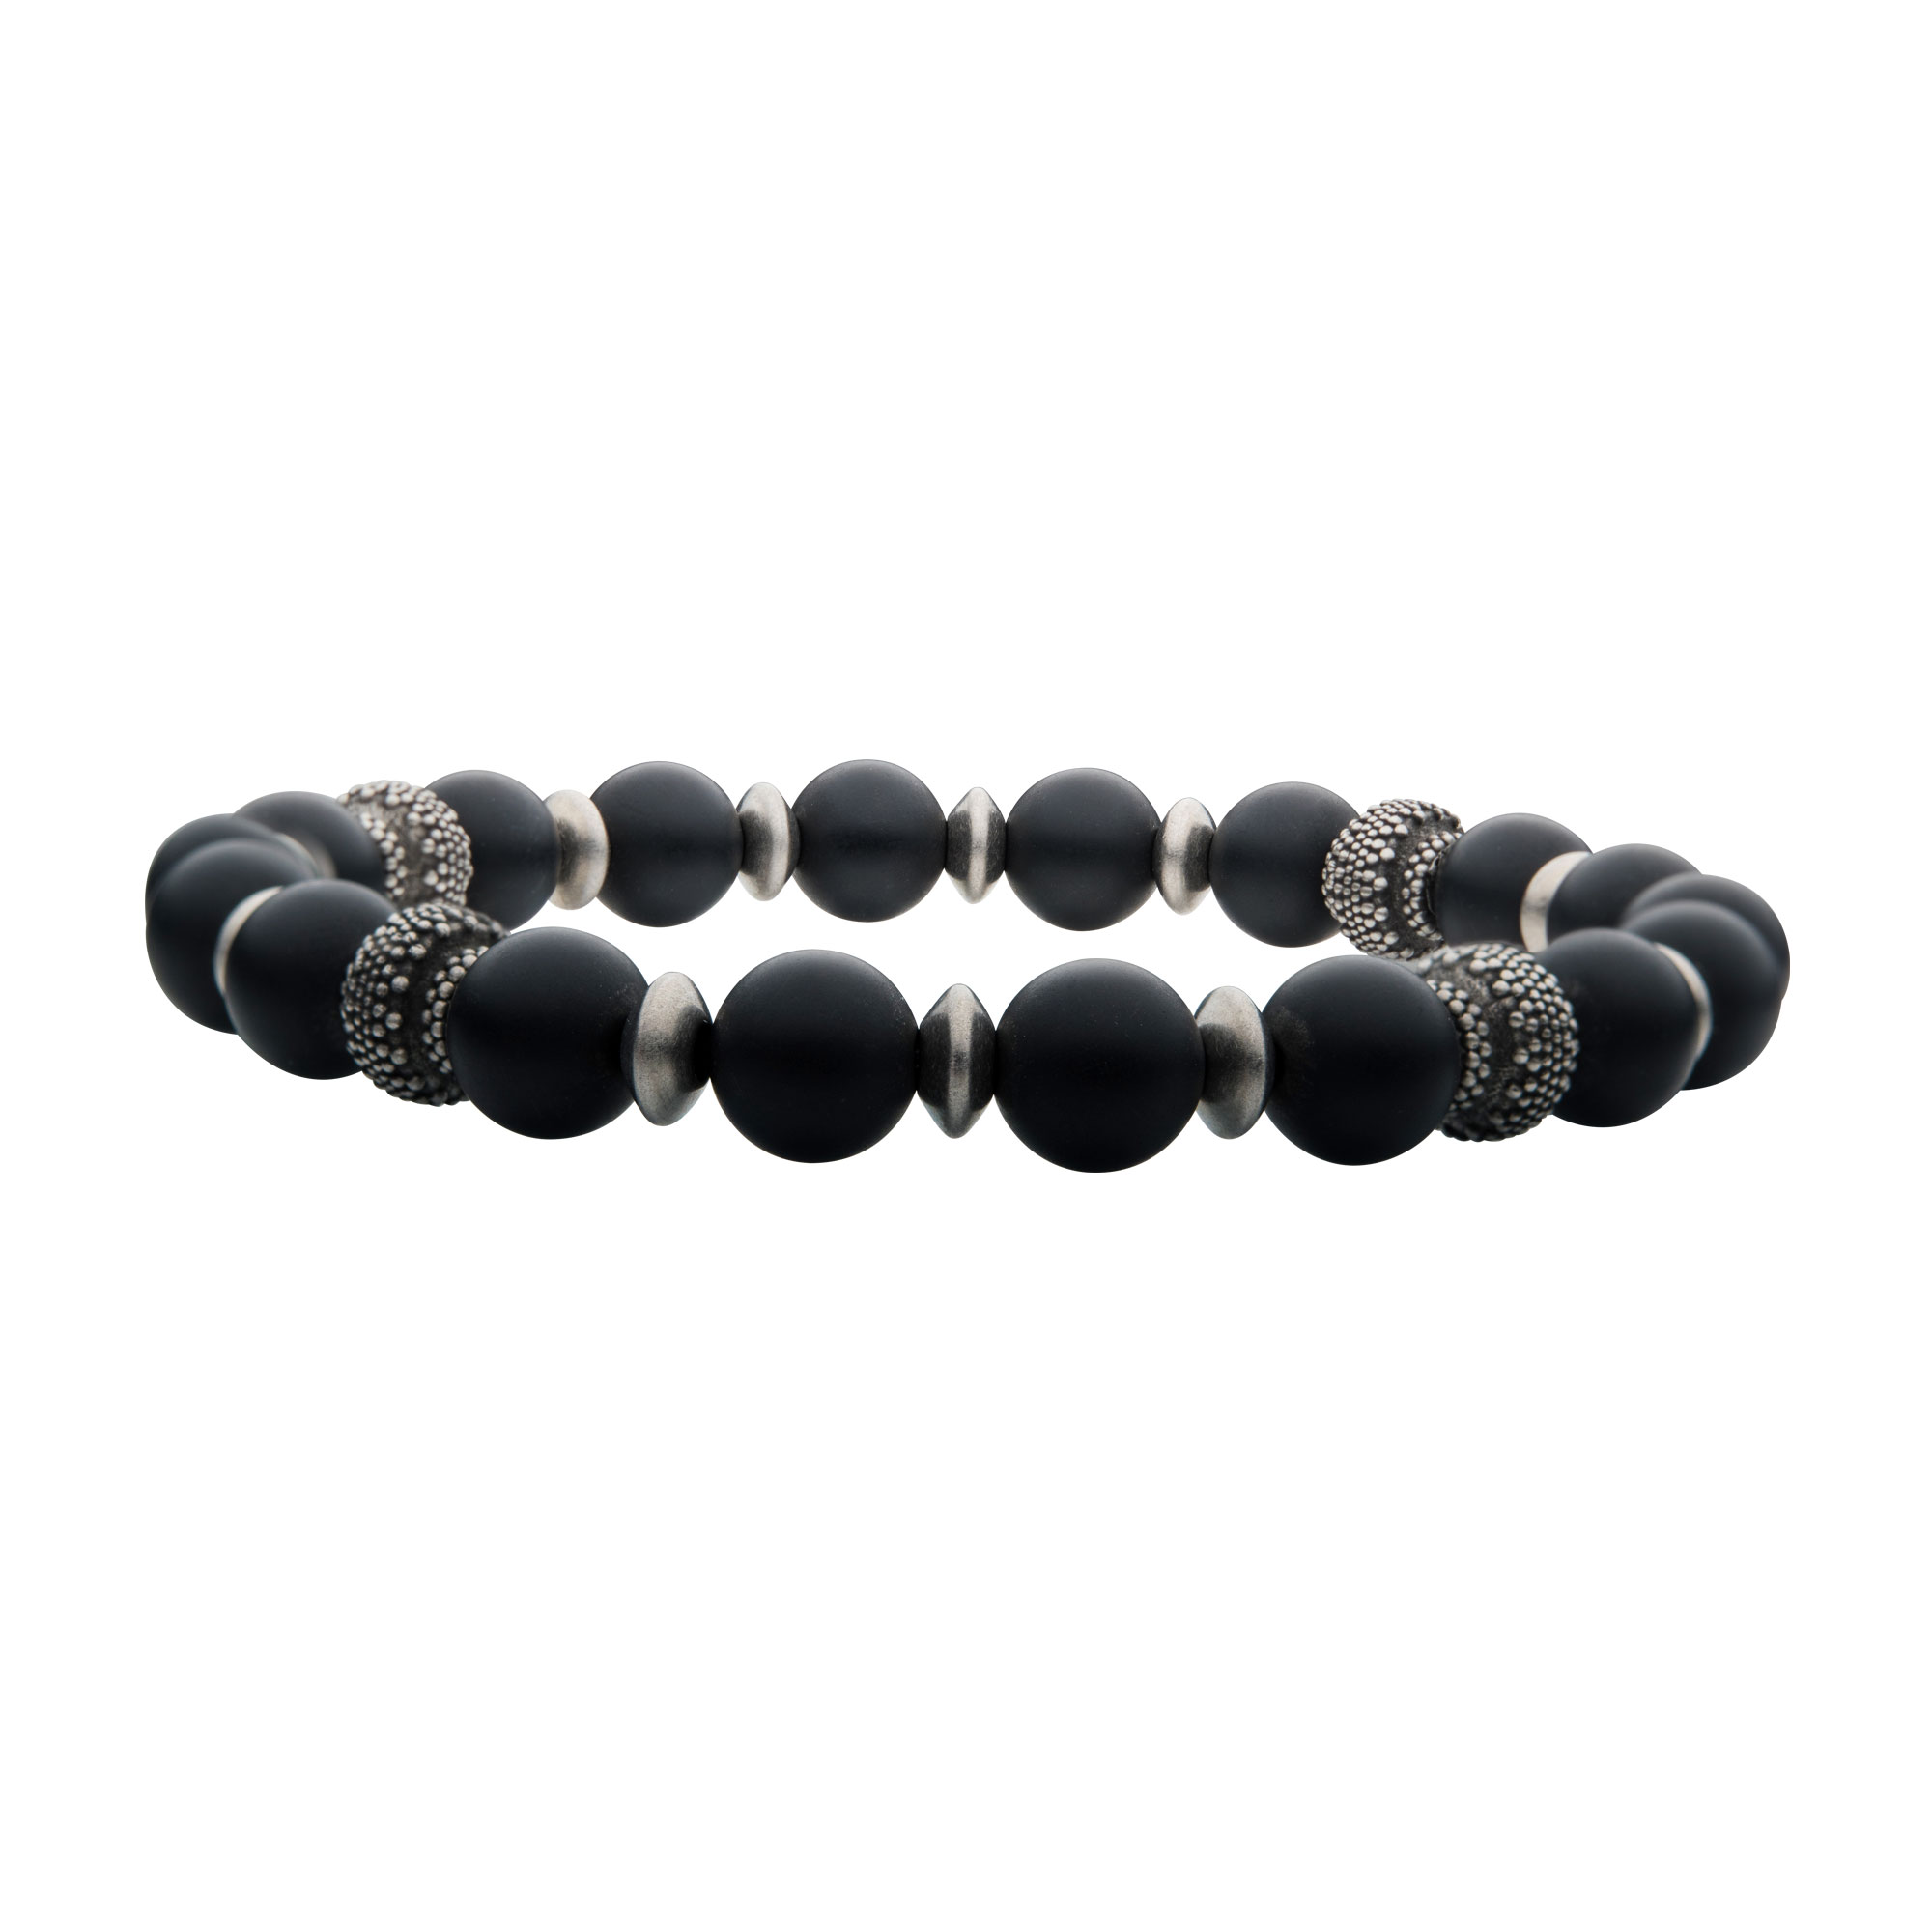 Matte Black Agate Stones with Black Oxidized Beads Bracelet Mueller Jewelers Chisago City, MN